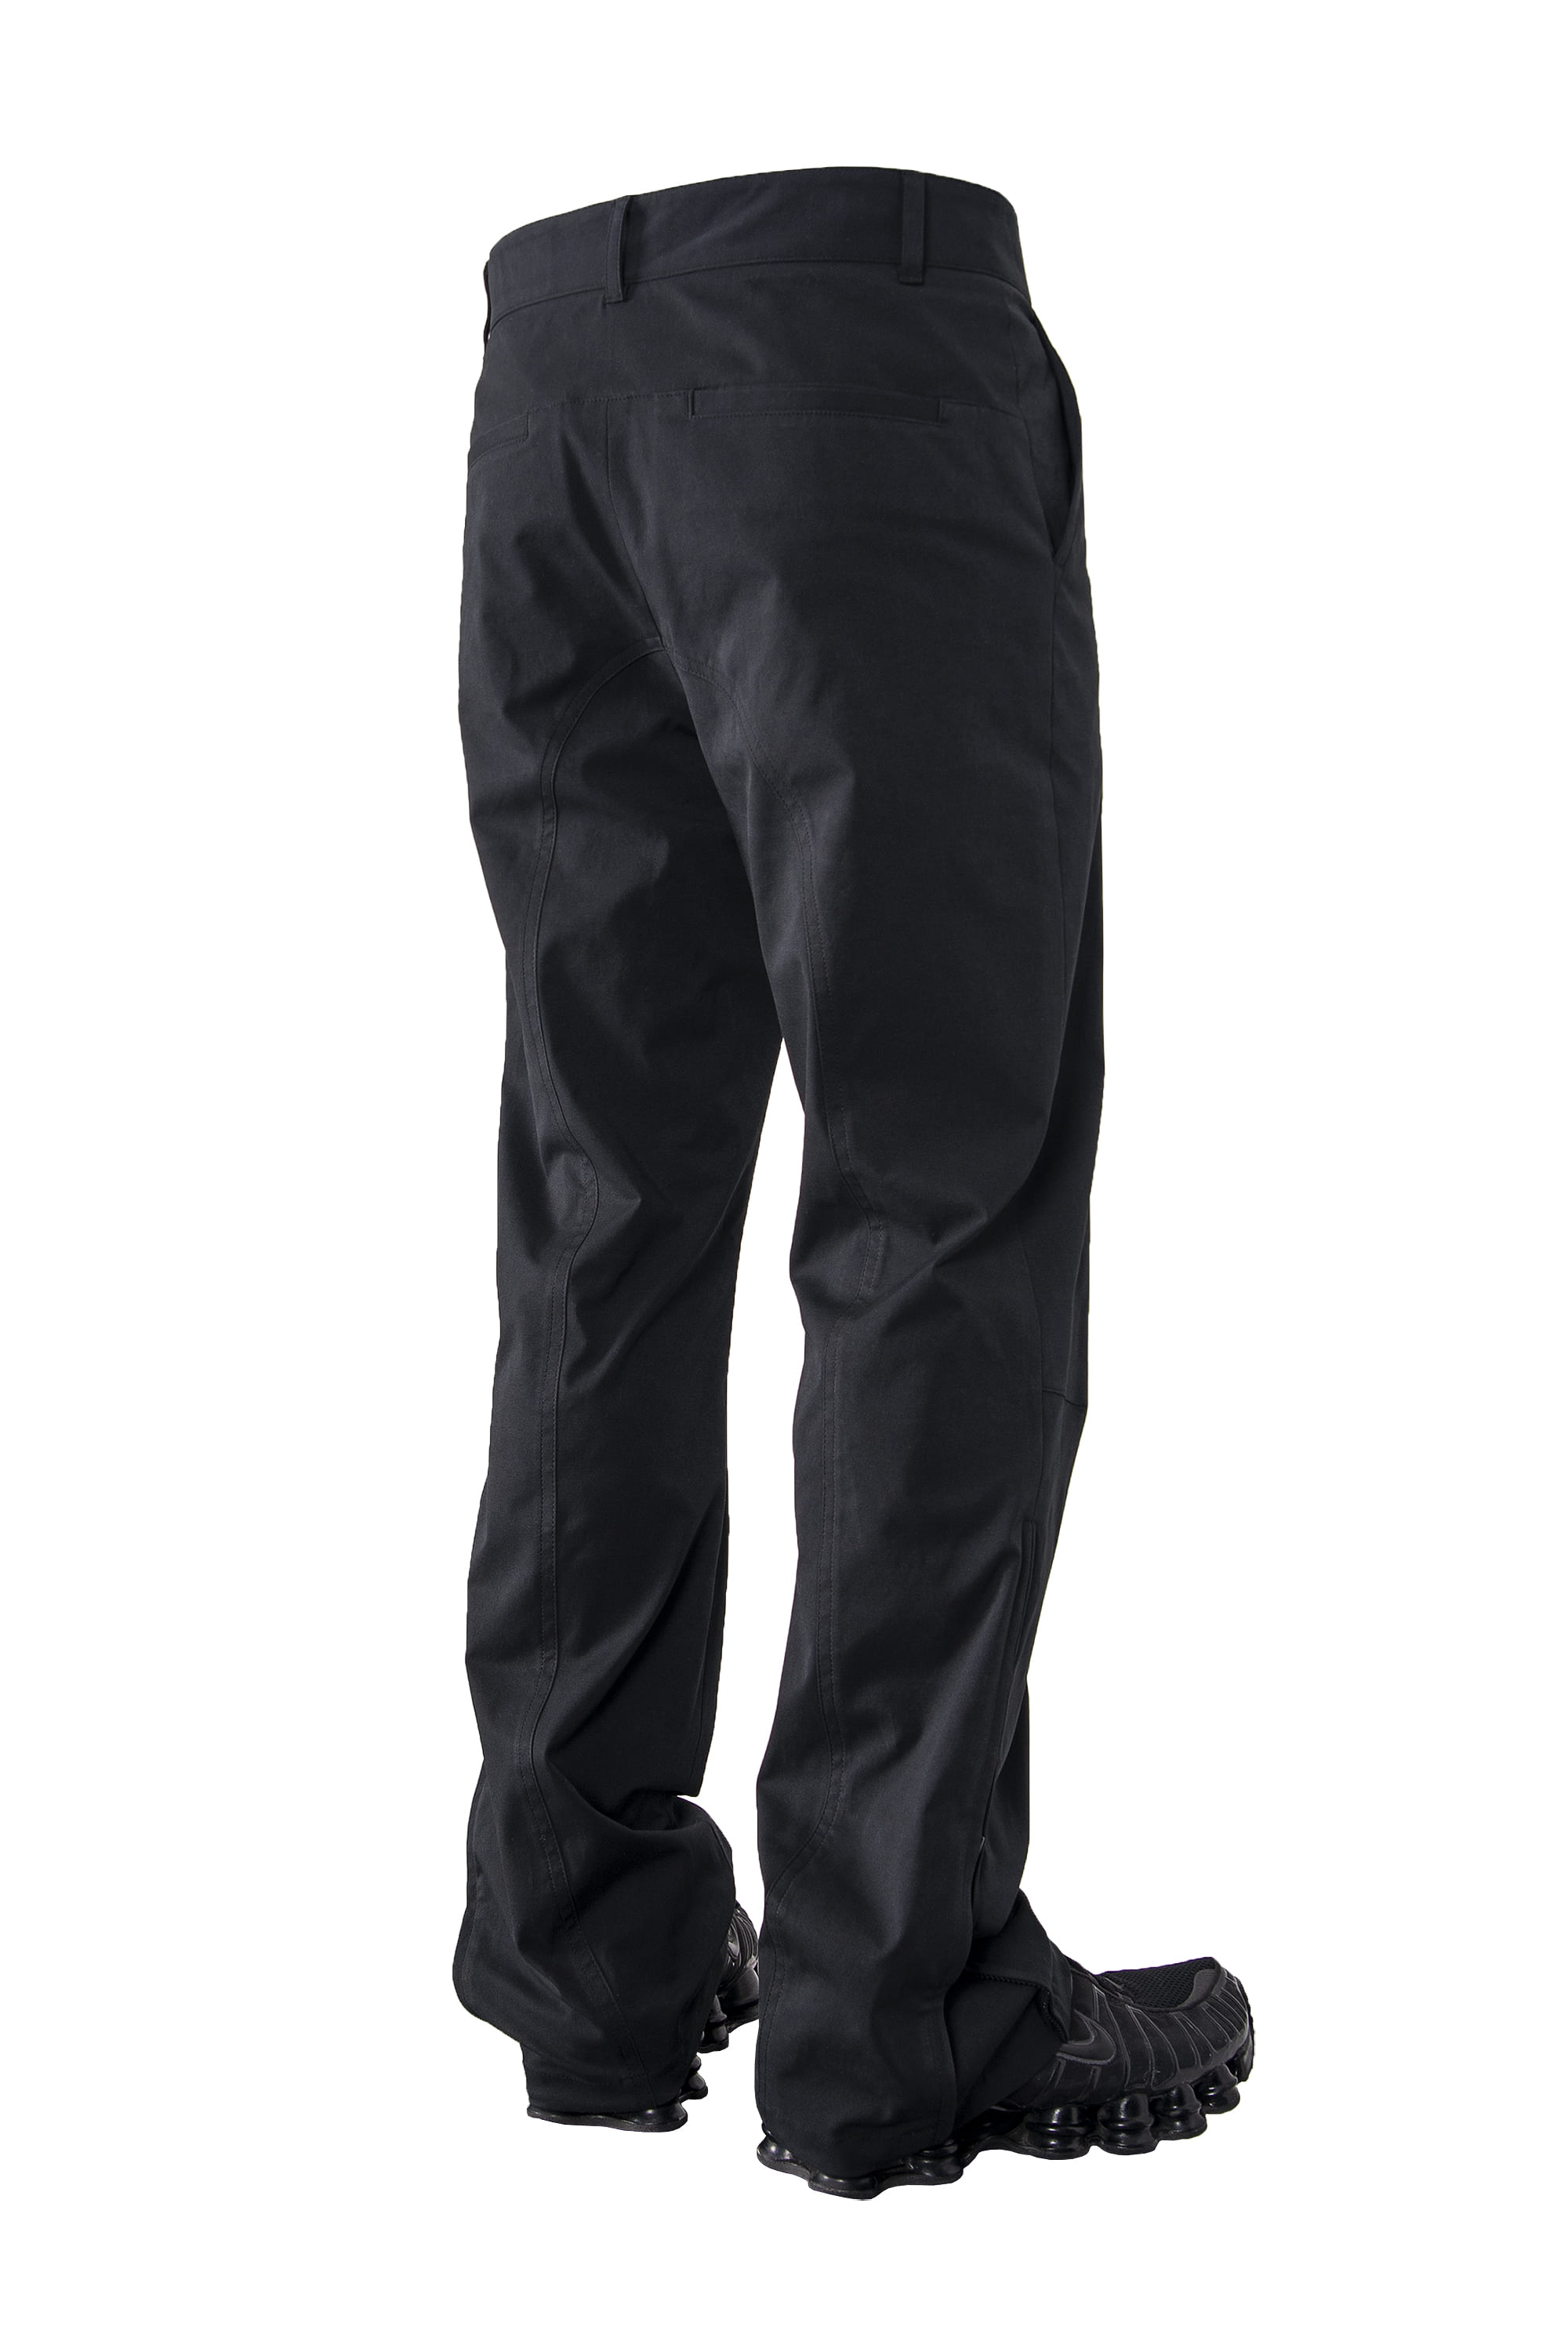 2021 utility trousers